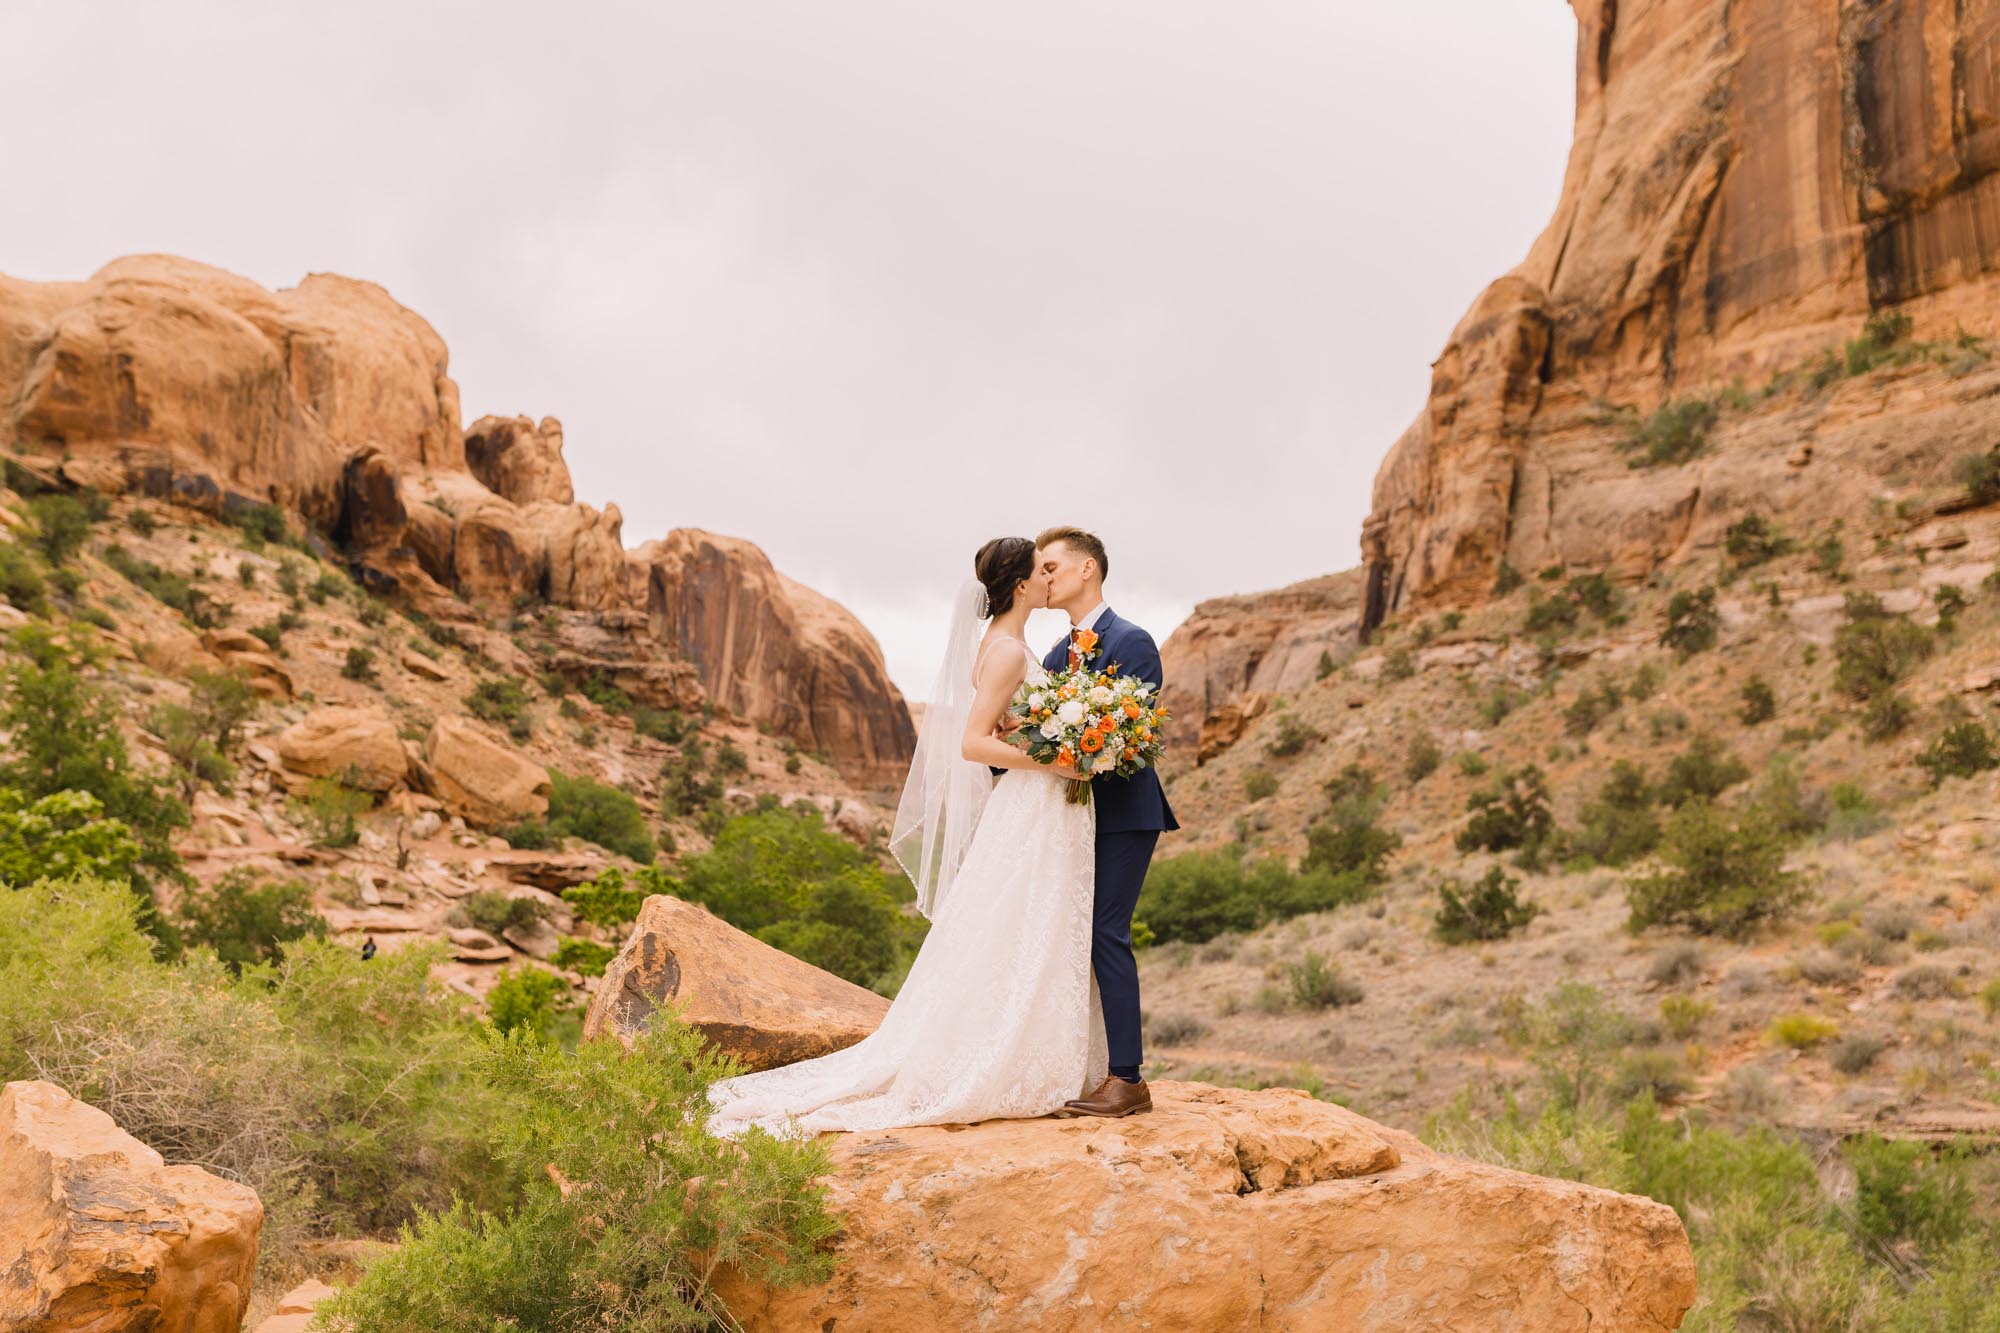 Bride and groom kiss in Arches National Park by Wanderlight, a Salt Lake City wedding photography company